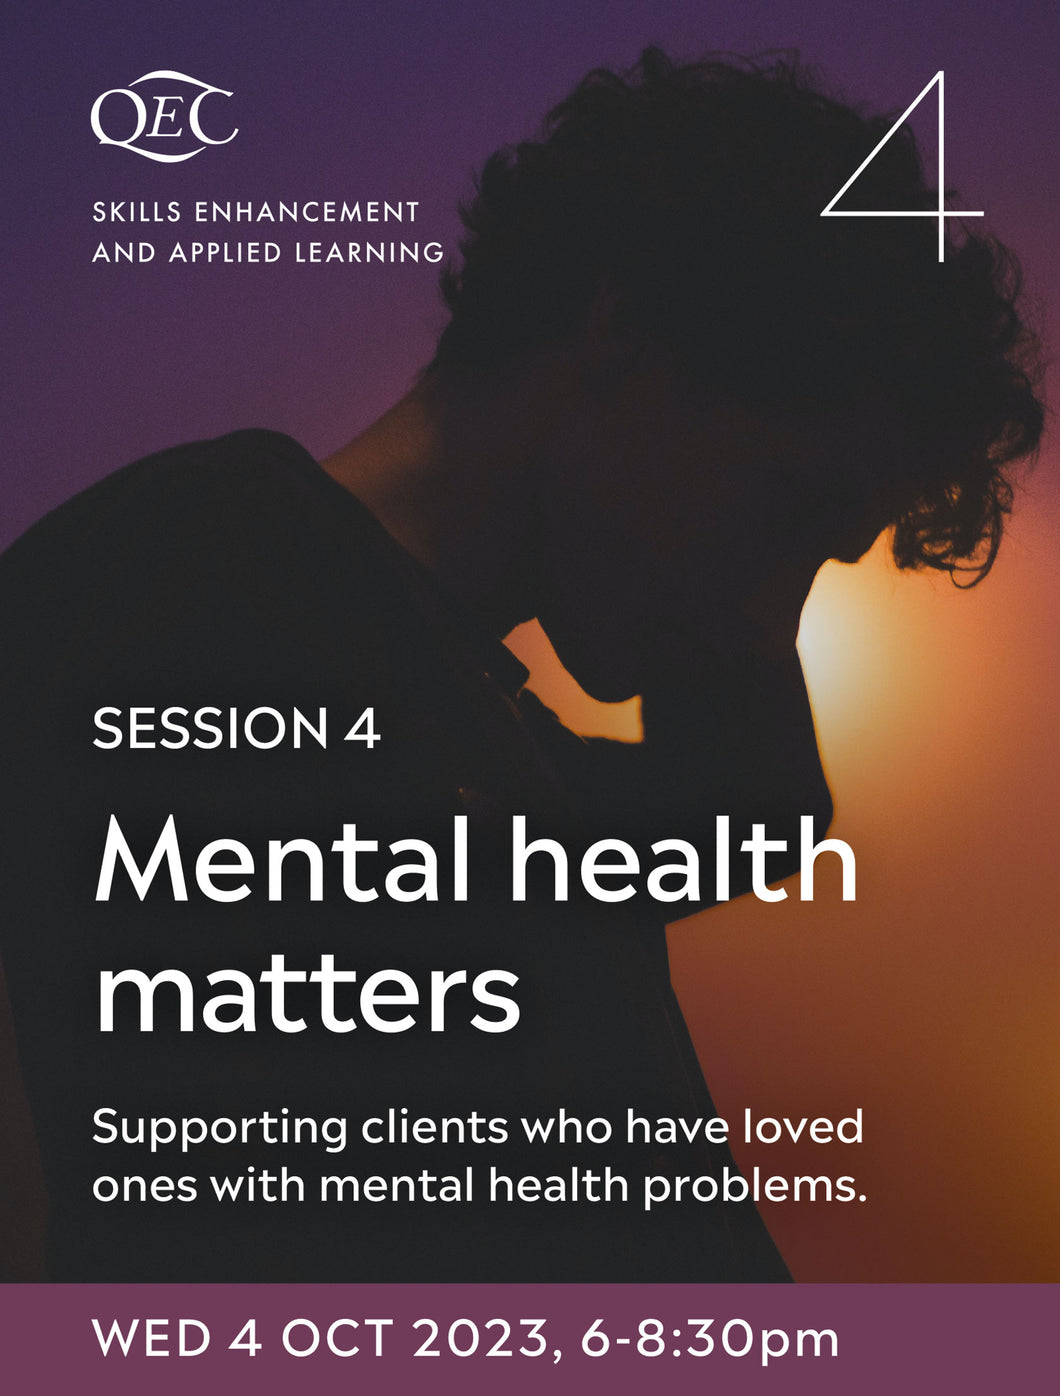 SEAL Session 4: Mental Health Matters - 4 Oct 23 (6-8.30pm, UK time)